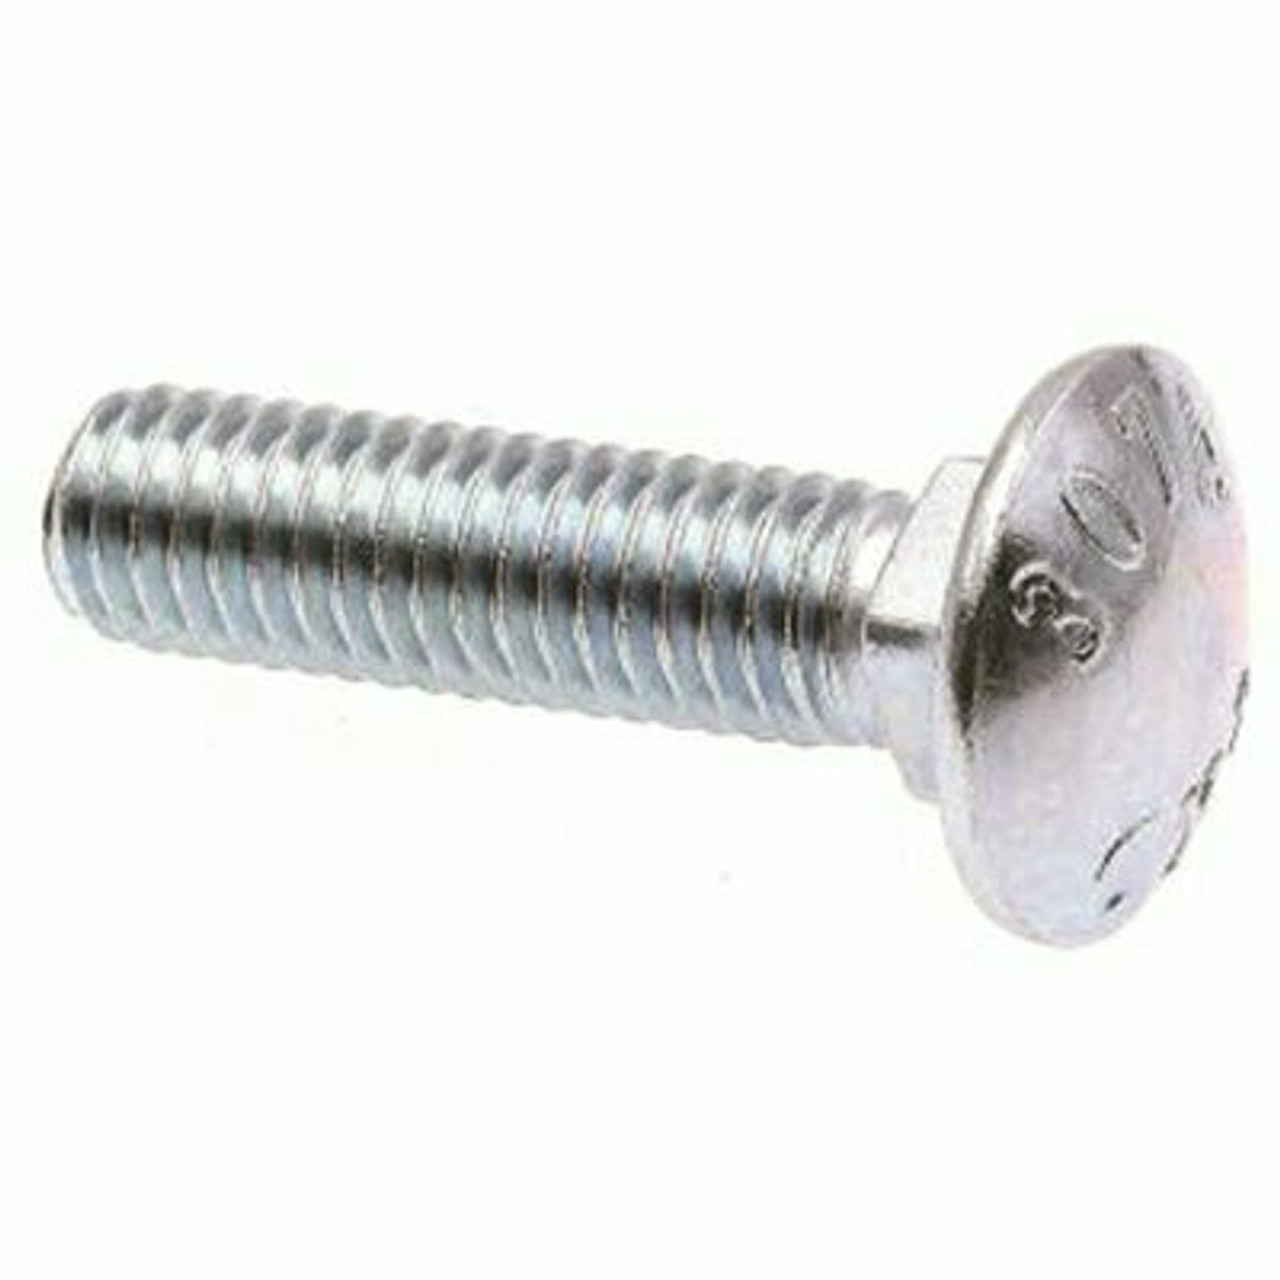 3/8 In.-16 X 1-1/2 In. Zinc Plated Carriage Bolts (100 Per Pack)